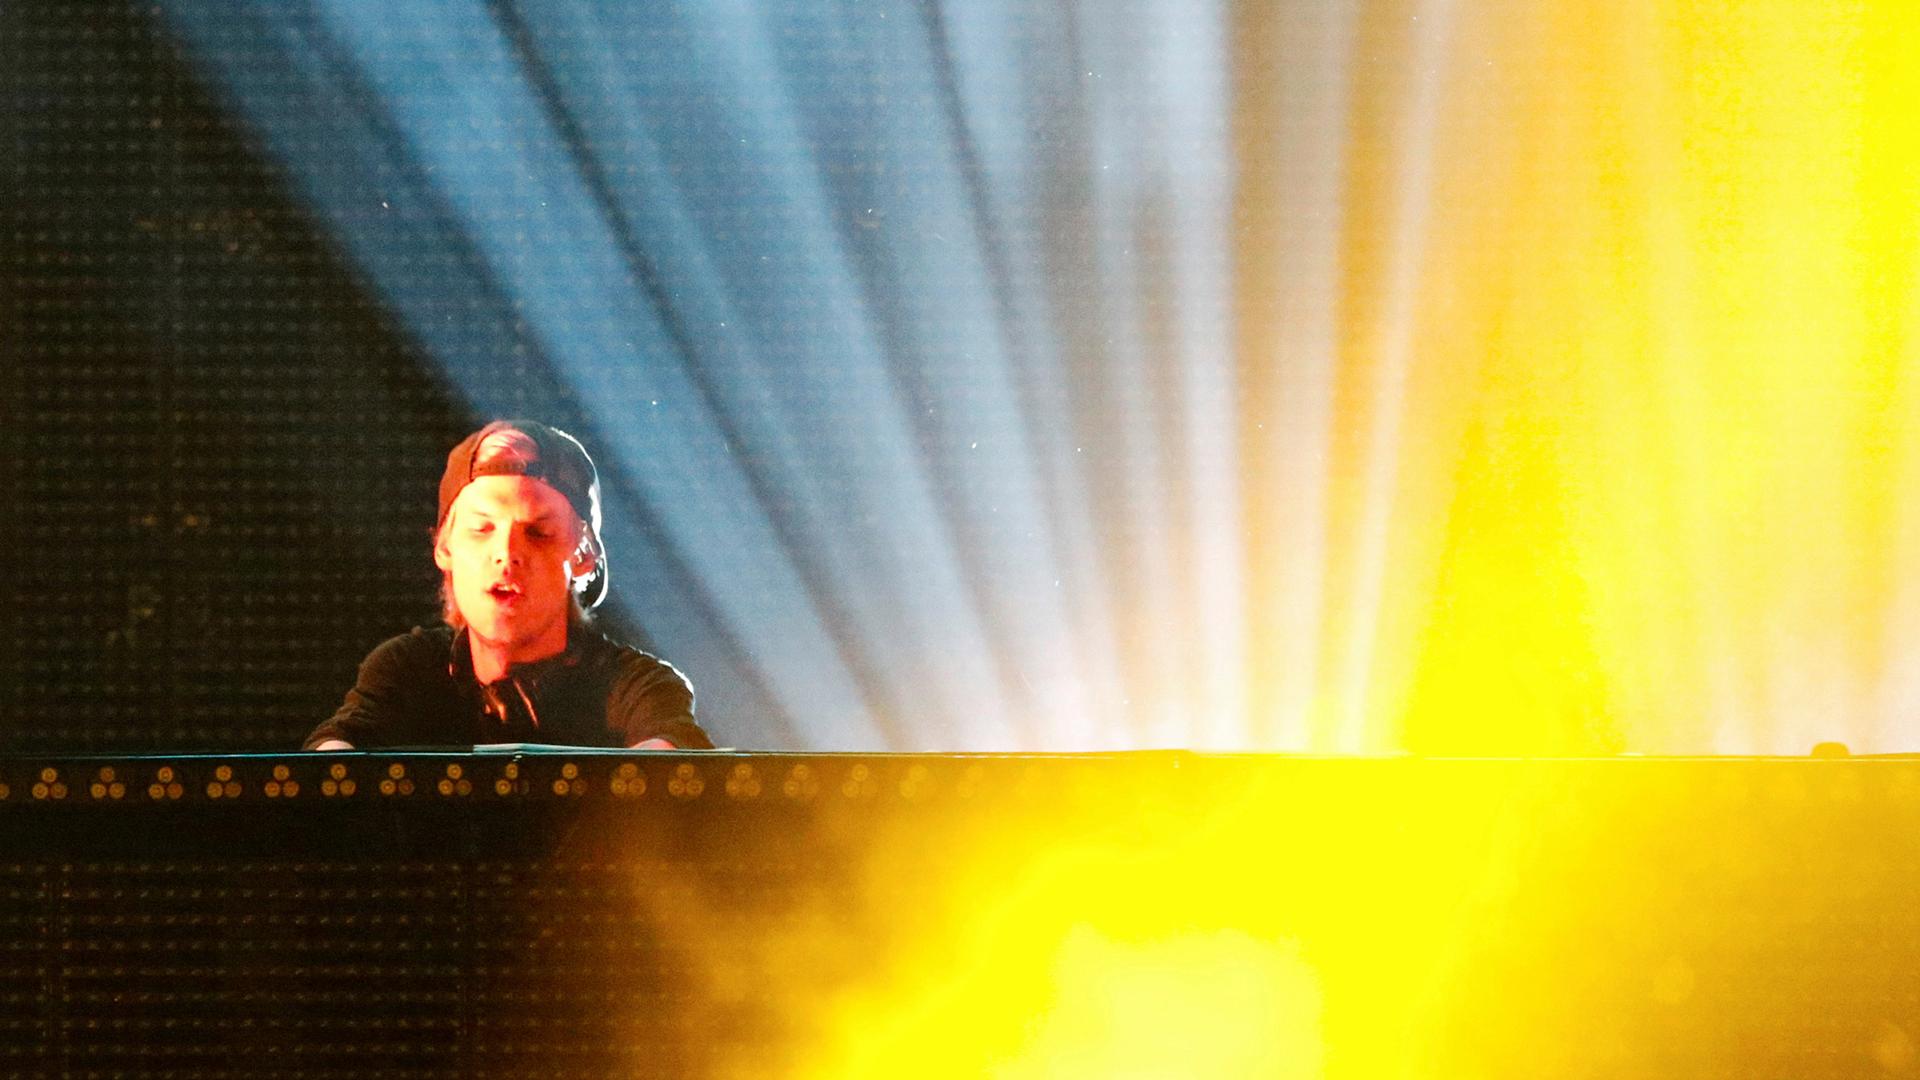 DJ Avicii performs while bright lights shine behind him during a concert at Brooklyn's Barclay's Center in New York.